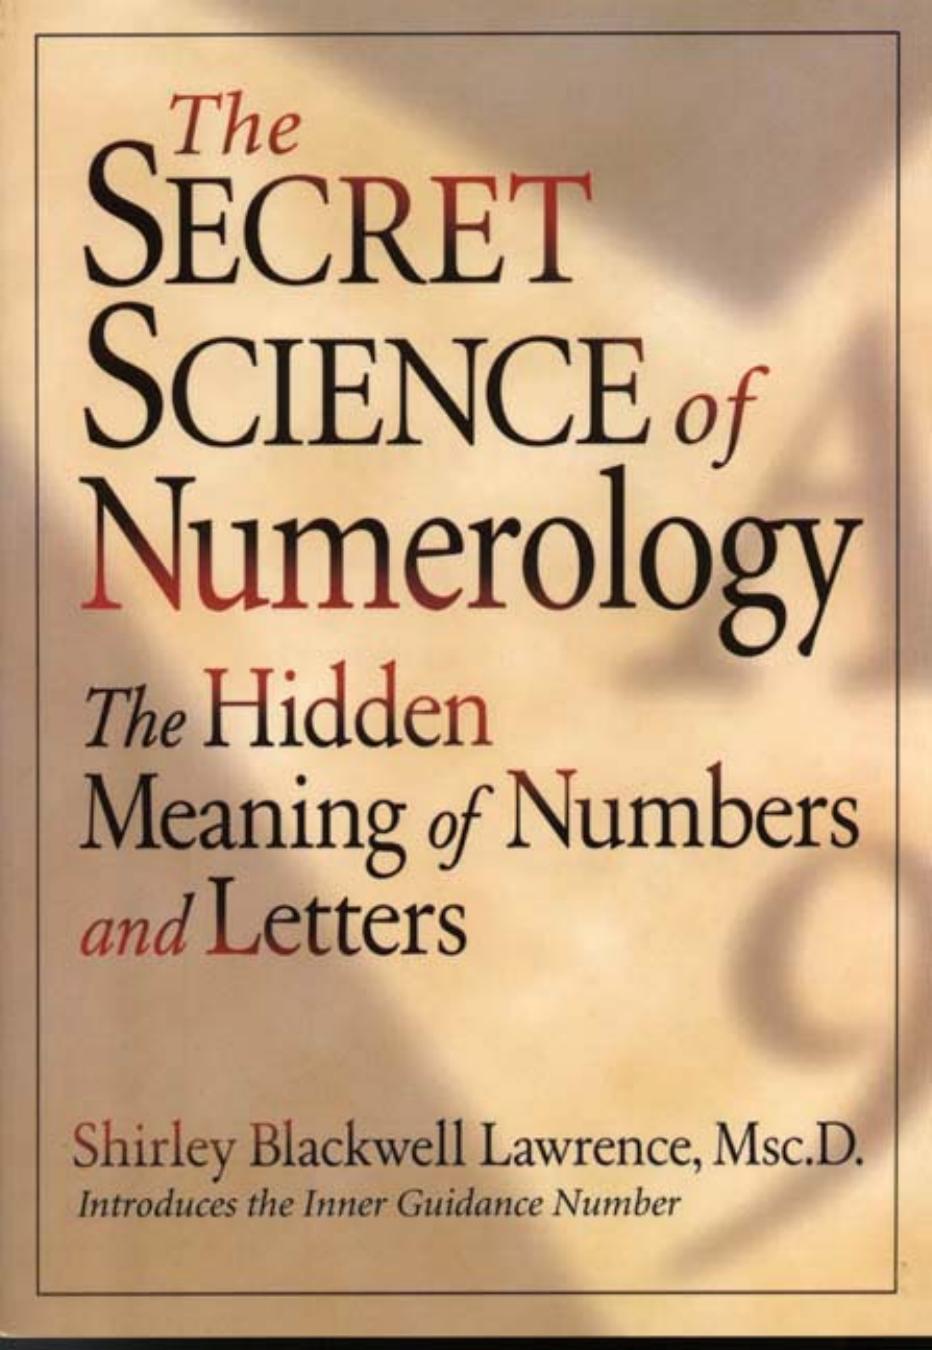 The Secret Science of Numerology: The Hidden Meaning of Numbers and Letters